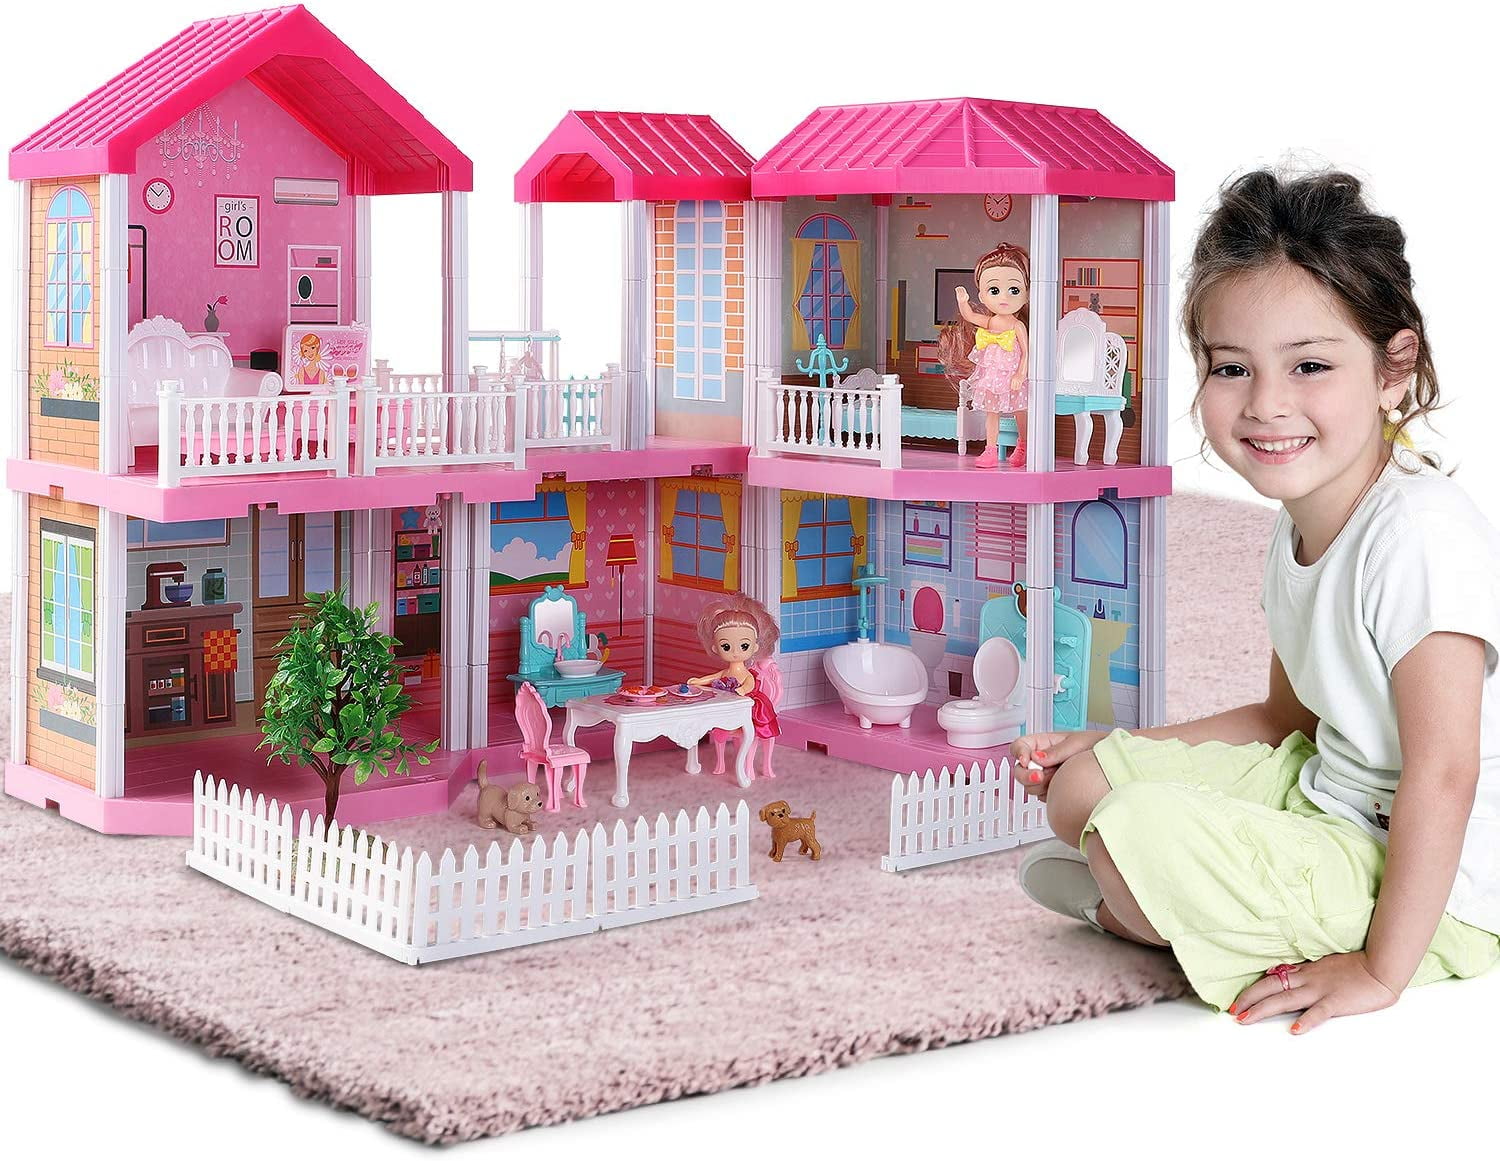 678 Doll House Kit,Dollhouse with Lights, Slide, Pets and Dolls, DIY  Pretend Play Building Playset Toys with Asseccories and Furniture, Princess  House